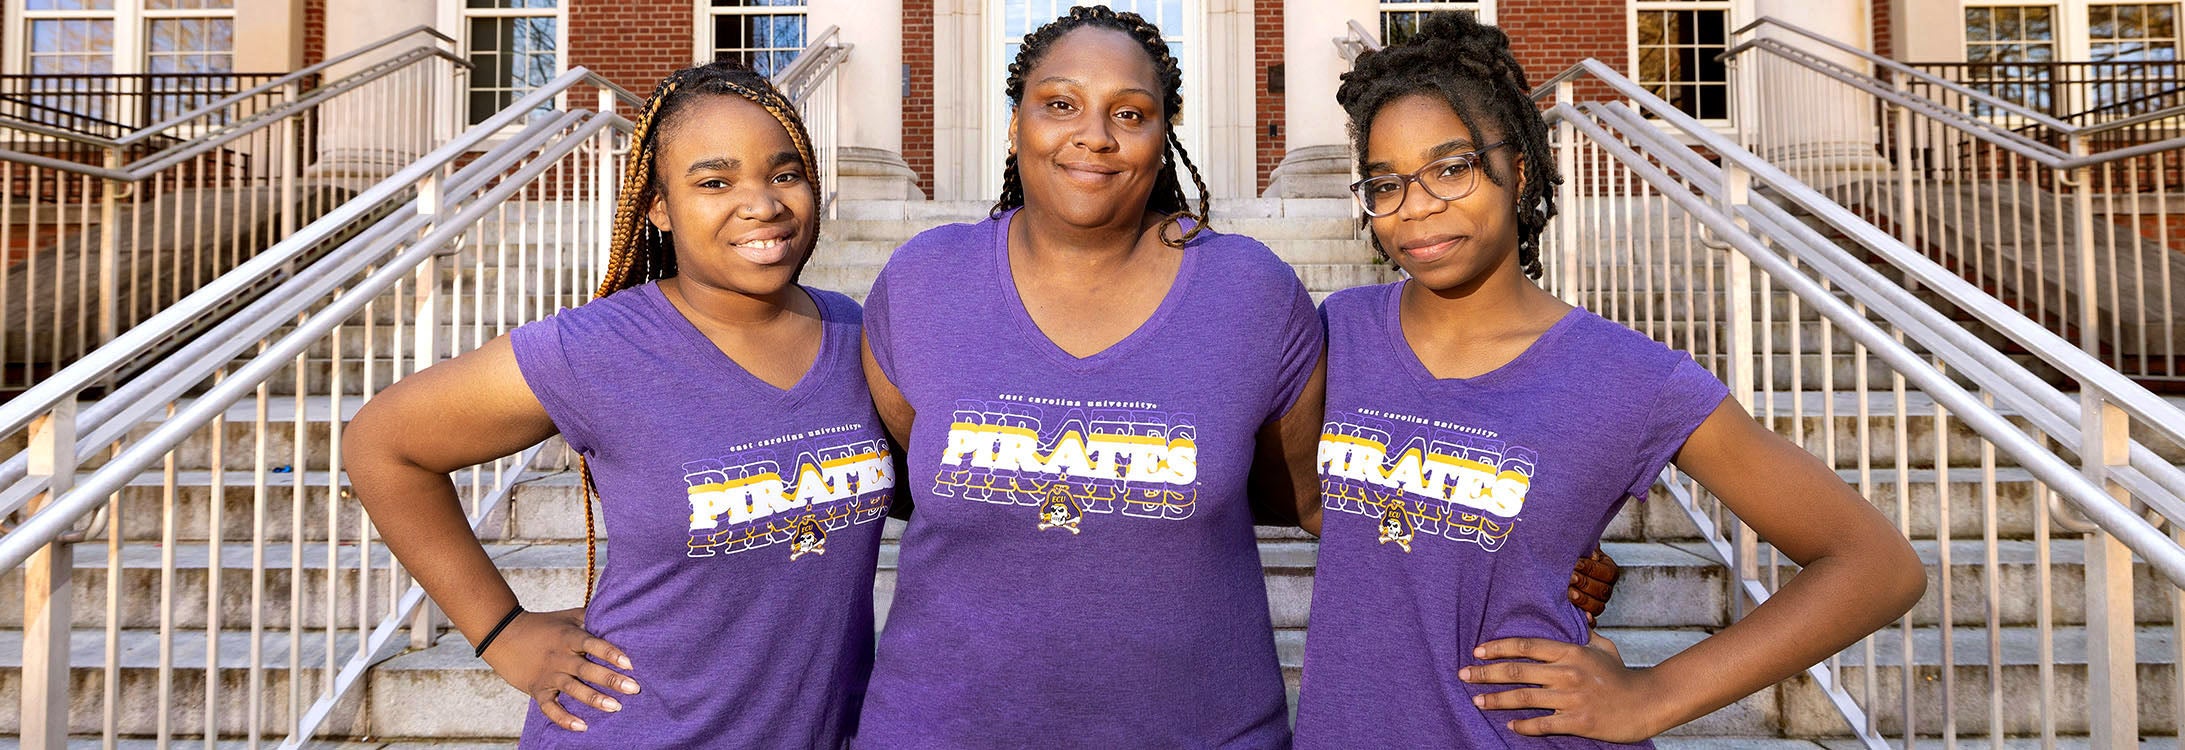 Tanisha Grimes, middle, a housekeeping supervisor at ECU, stands with two of her six children on ECU’s campus. Ashawndrea, left, is a rising senior in the clinical laboratory science program and Ashari attends Innovation Early College High School at ECU.